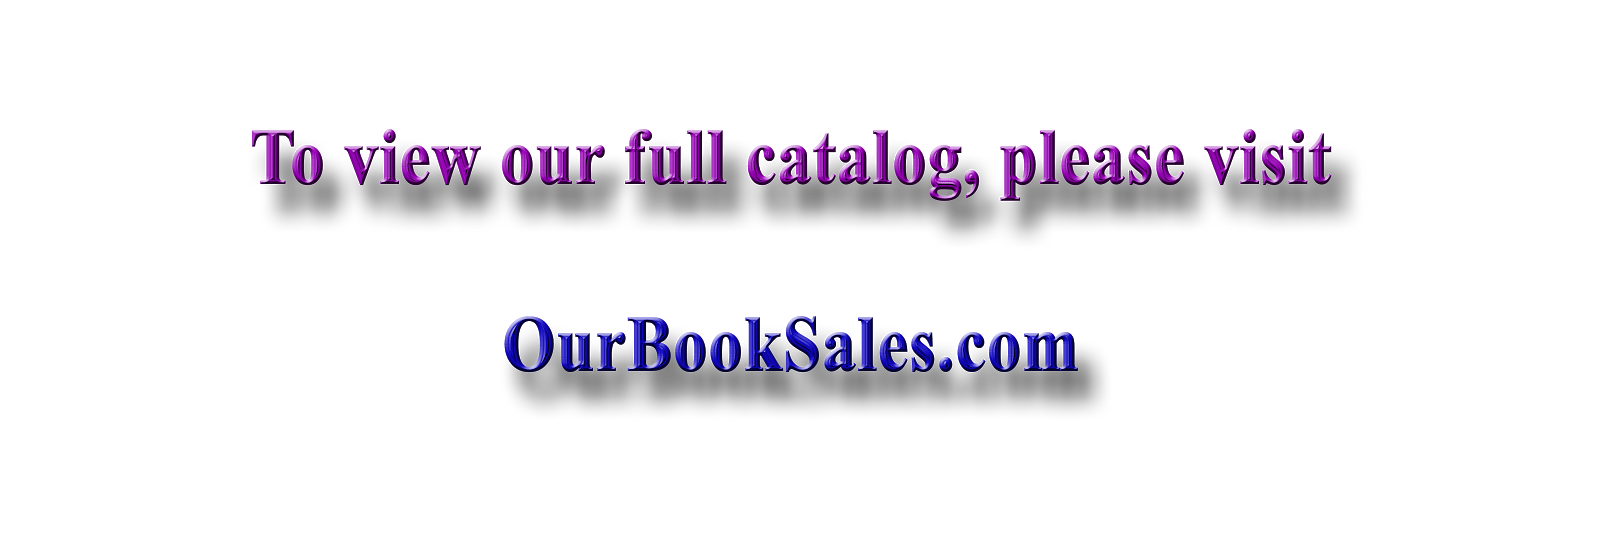 To View Our Full Catalog, Please Visit OurBookSales.com